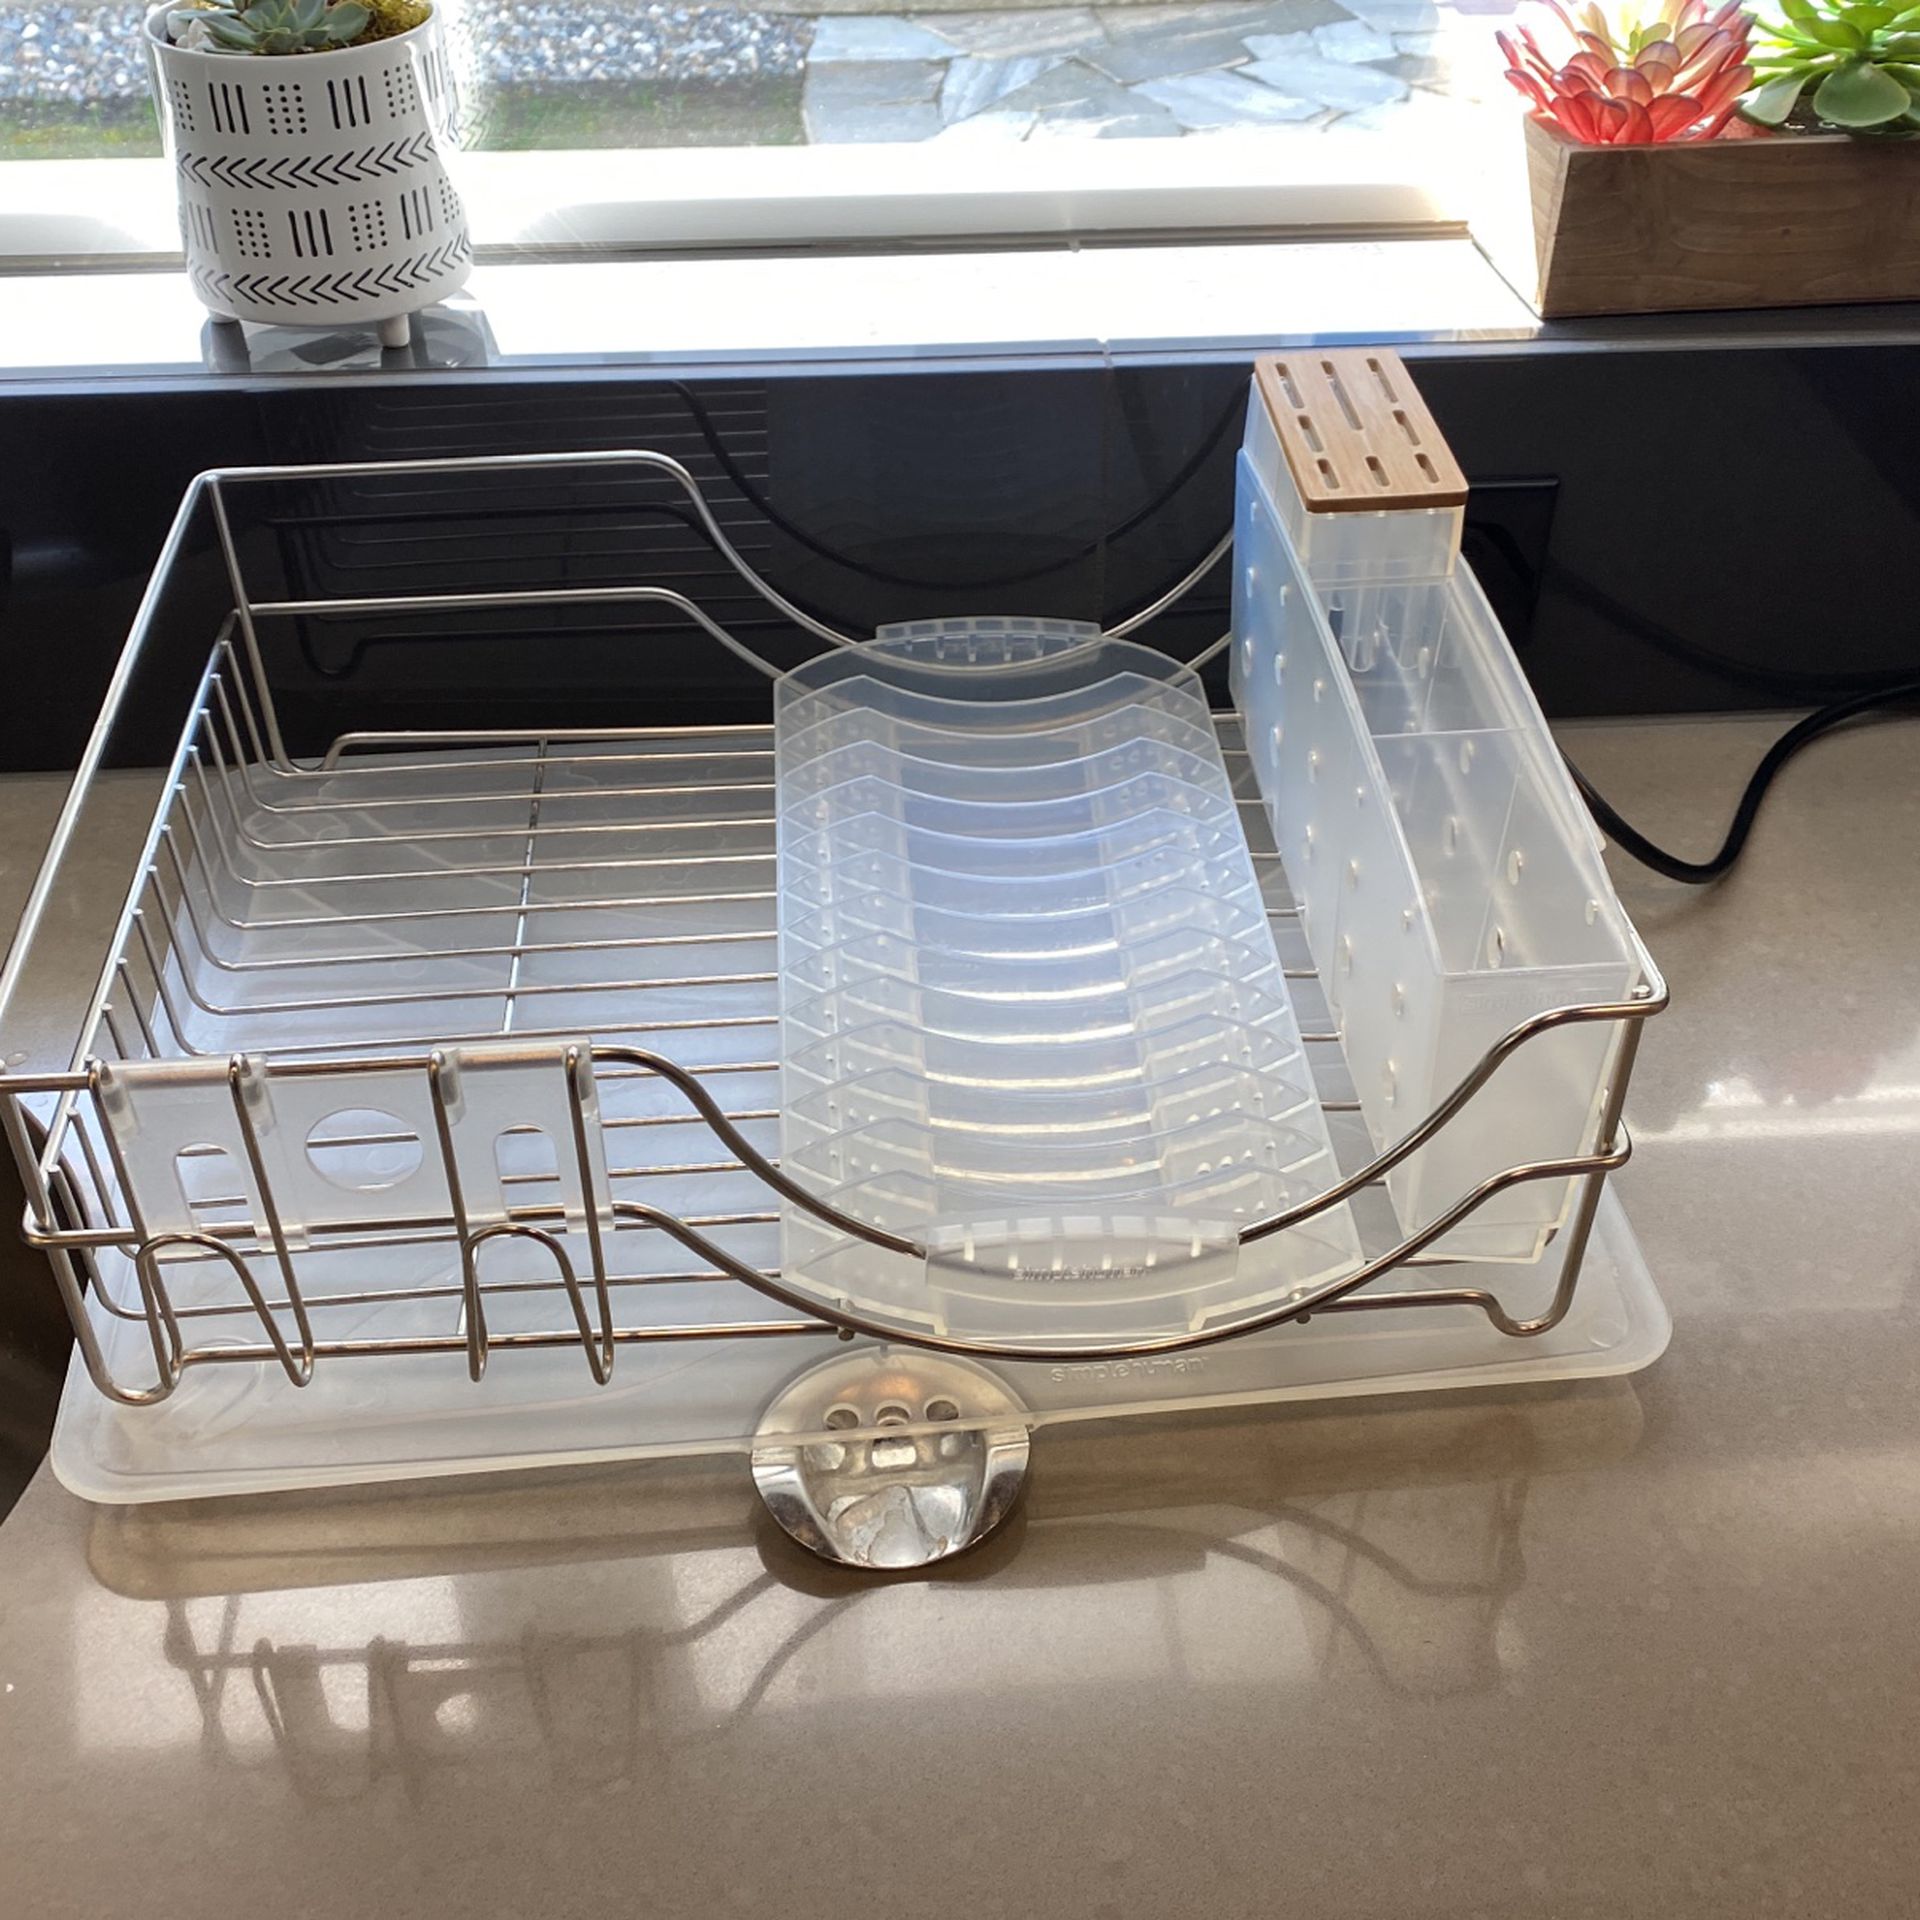 Simple Human Dish Drying Rack for Sale in Bonney Lake, WA - OfferUp